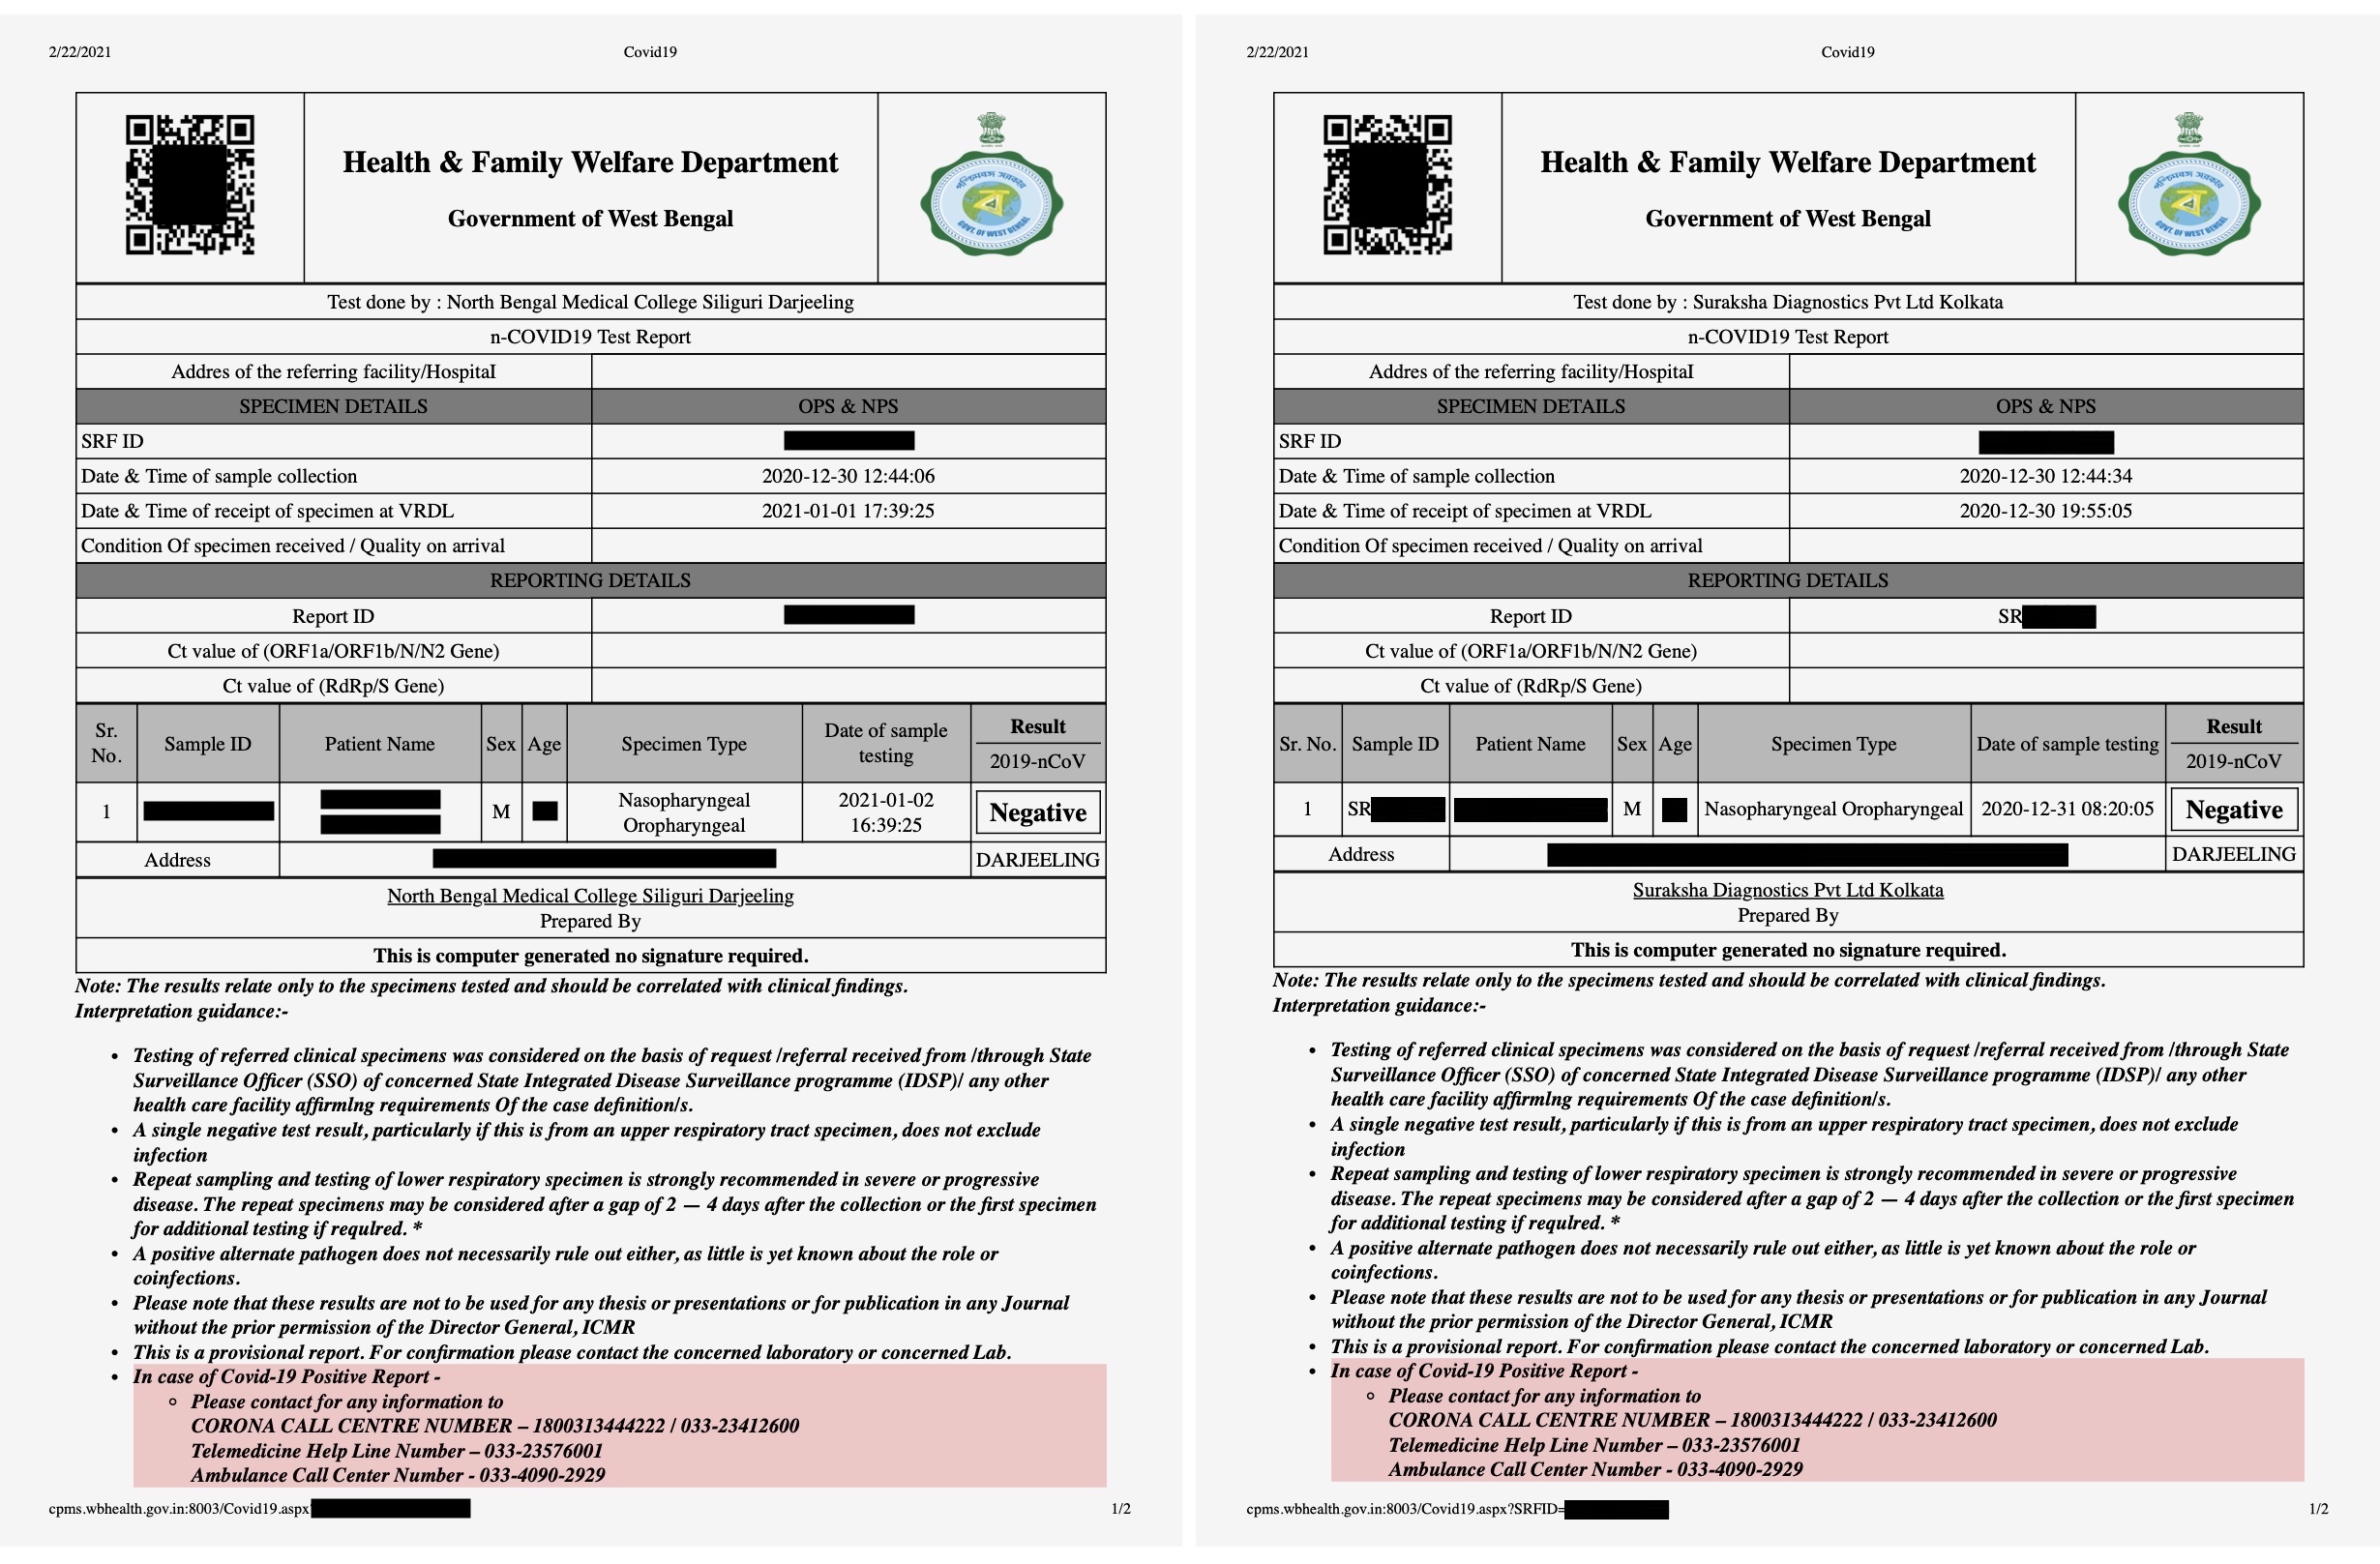 Two COVID-19 lab test results, but with details redacted, to show what kind of data has been exposed.